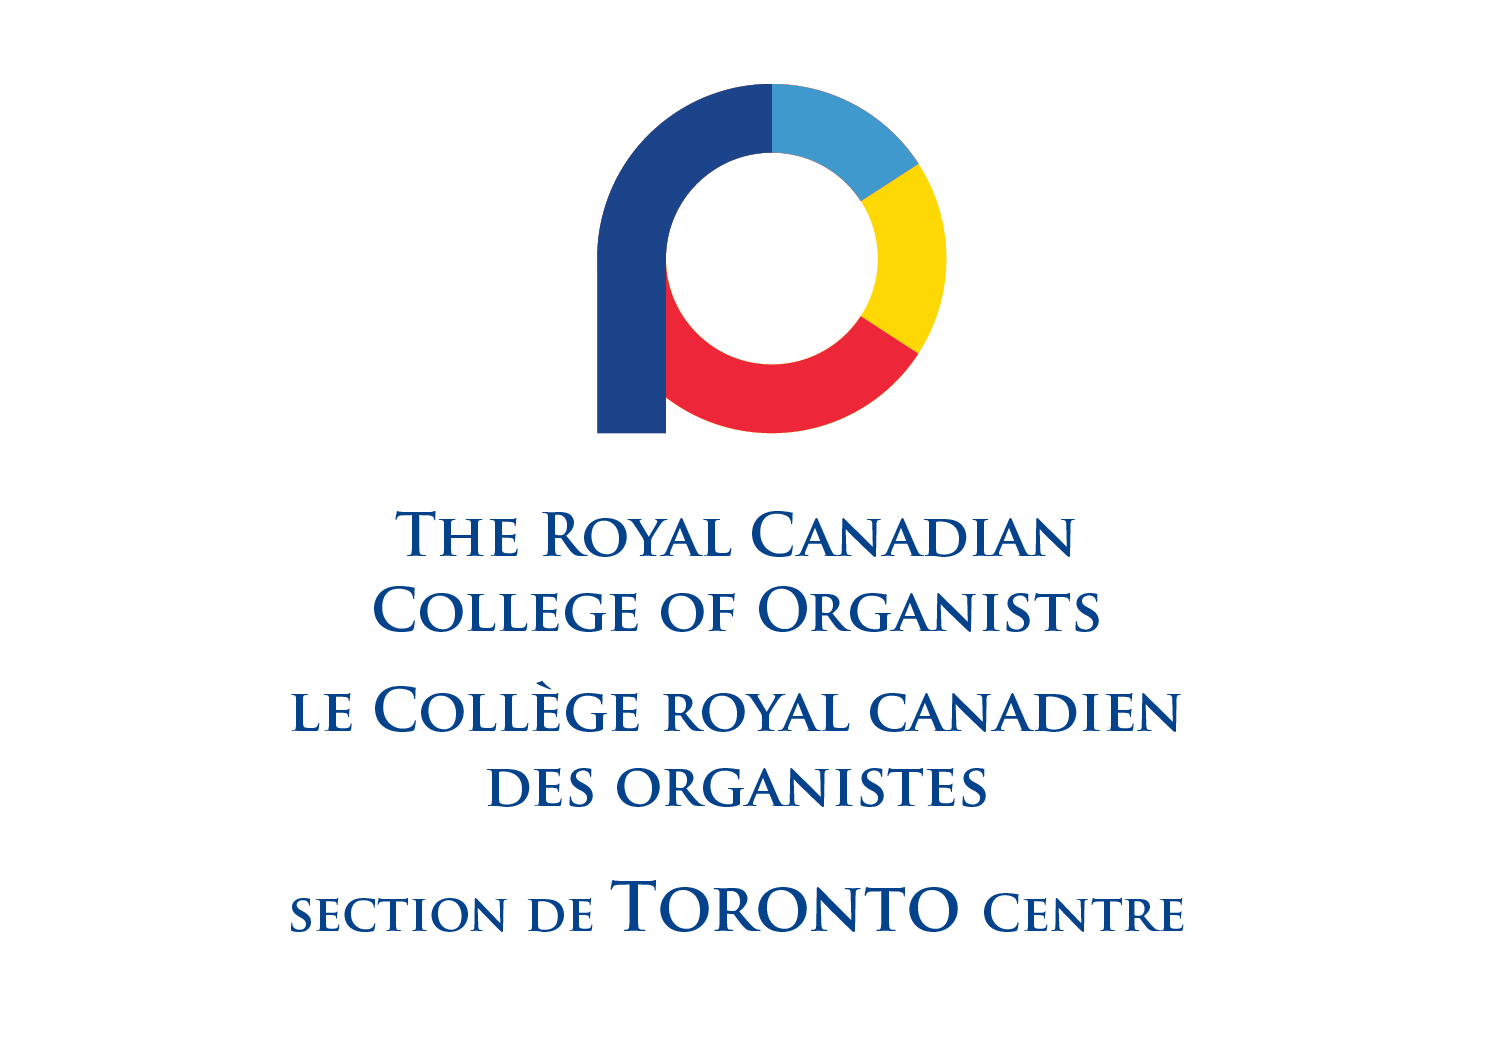 The Royal Canadian College of Organists Toronto